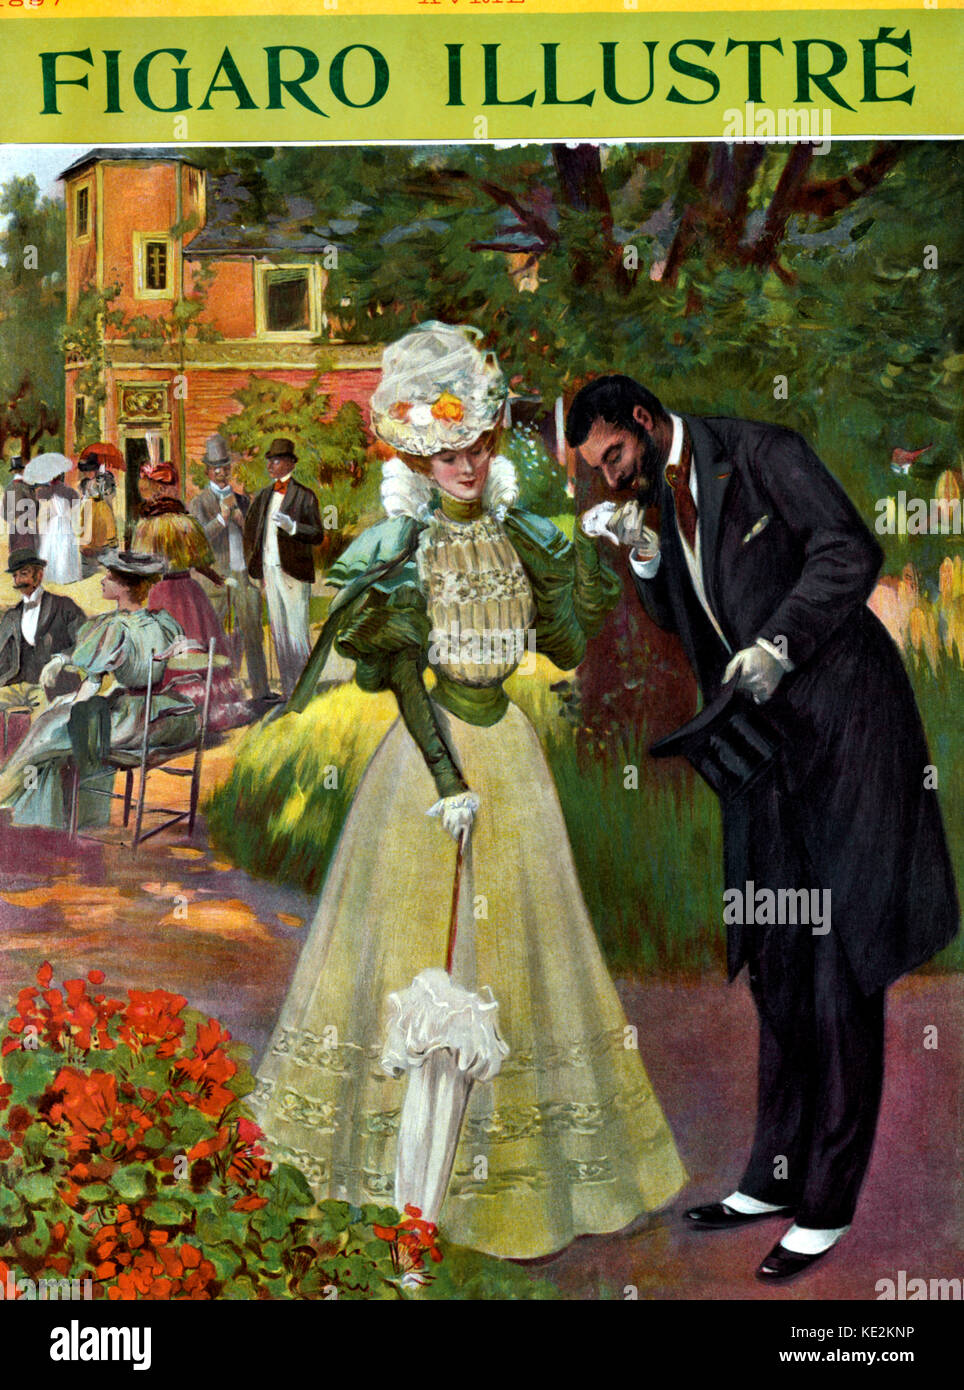 Man kissing woman's hand - Cover of Figaro Illustré, April 1897. Woman is wearing typical late 19th century dress with leg of mutton sleeves and hat and holds a parasol. Man is wearing a black suit with spats and a top hat.  Illustration by Pierre-Georges Jeanniot (French painter, 1848-1934). Stock Photo